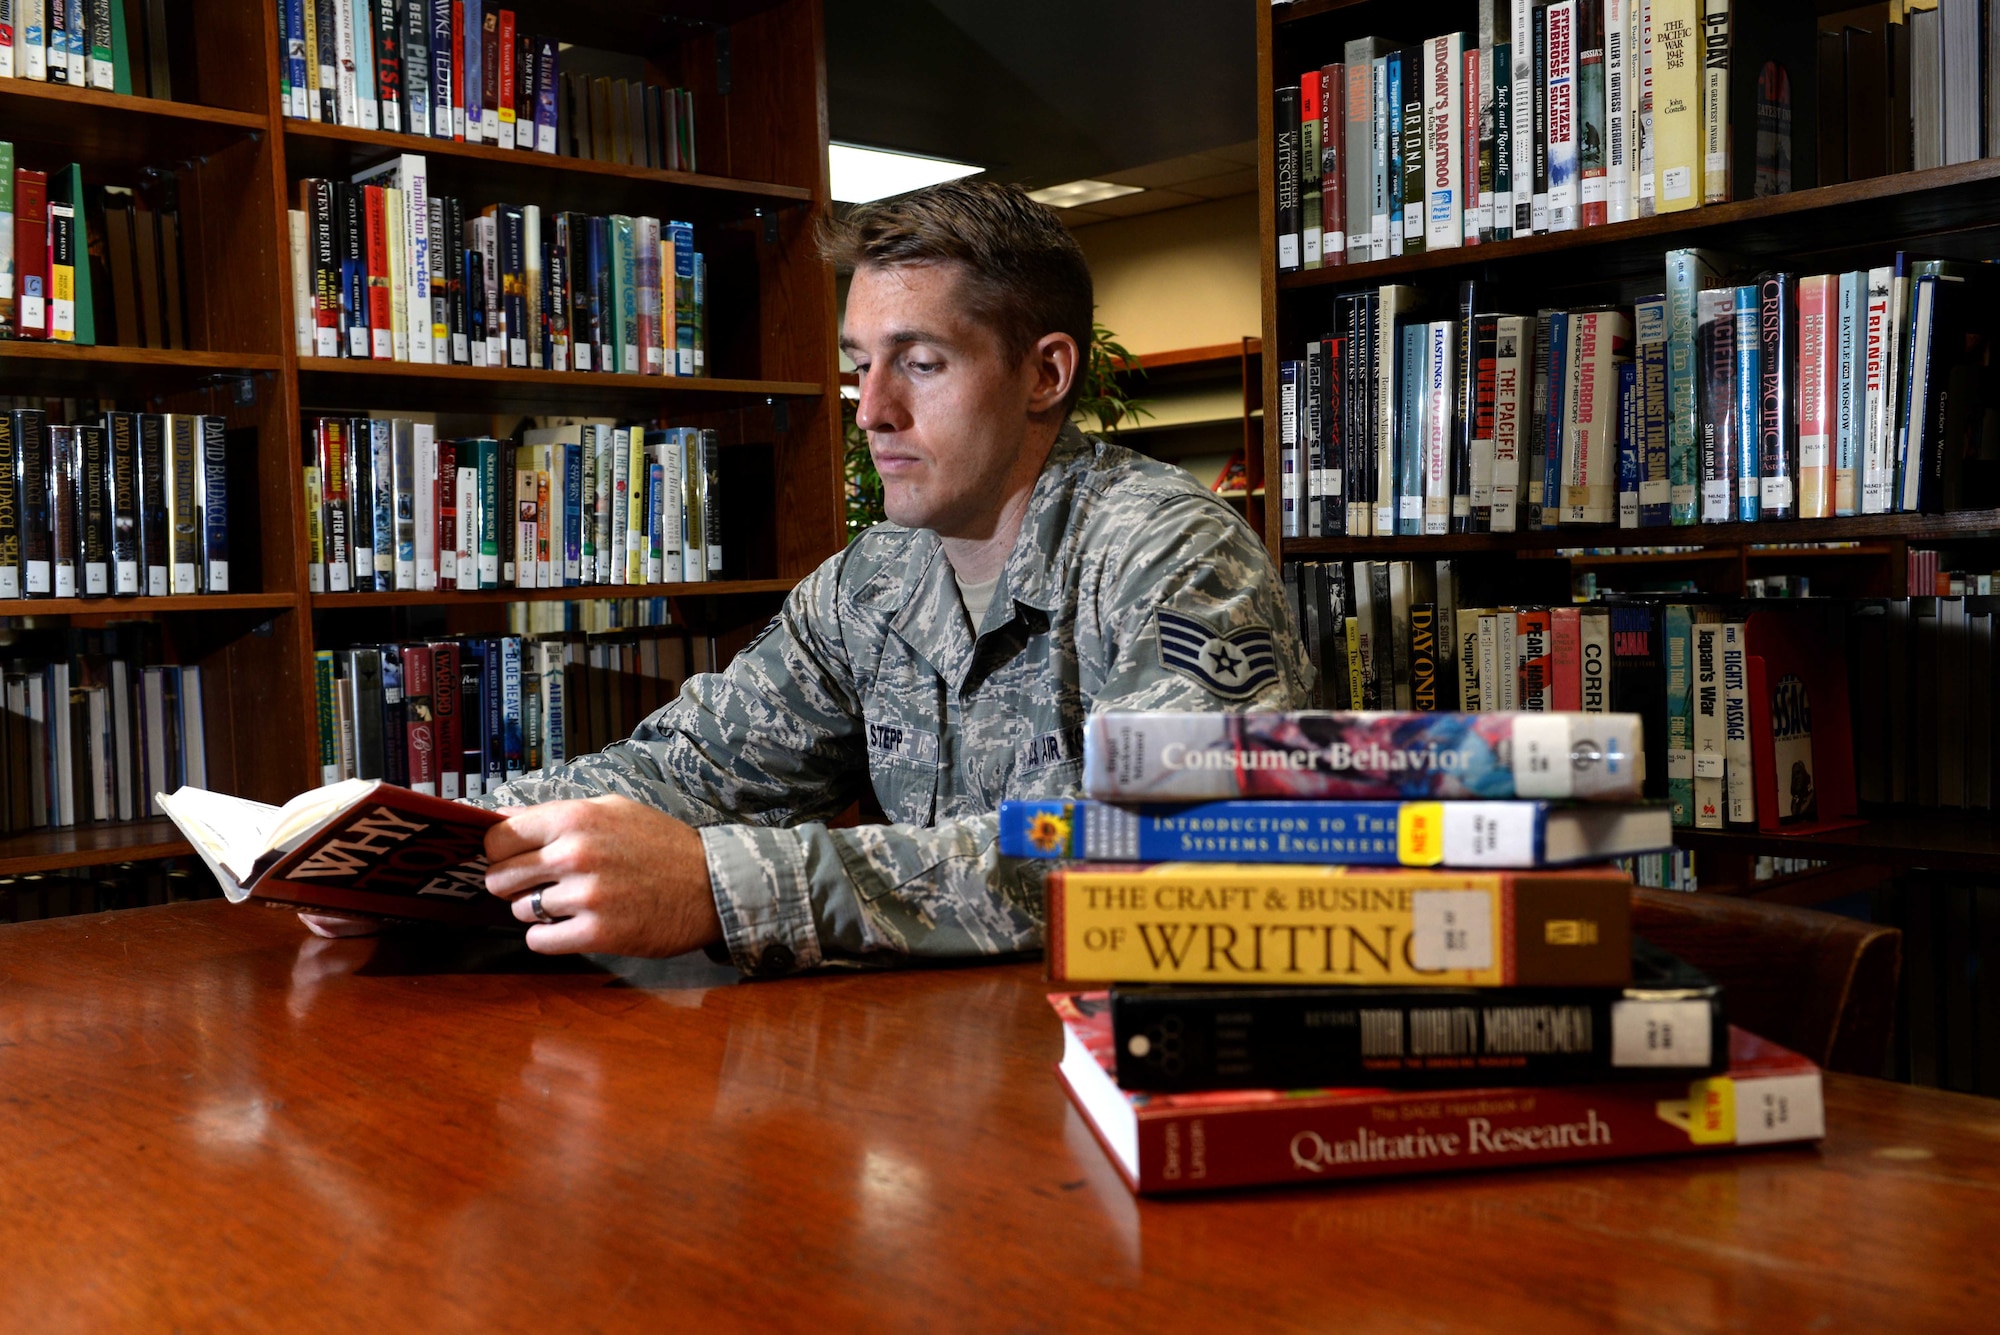 Staff Sgt. Joshua Stepp, 36th Maintenance Group quality assurance evaluator, studies at the base library Nov. 6, 2015, at Andersen Air Force Base, Guam. In fiscal 2015, more than 170 Airmen here graduated with either their associate’s, bachelor’s or master’s degree, making Andersen AFB No. 1 for education in the Pacific Air Forces region. (U.S. Air Force photo by Airman 1st Class Alexa Ann Henderson/Released)